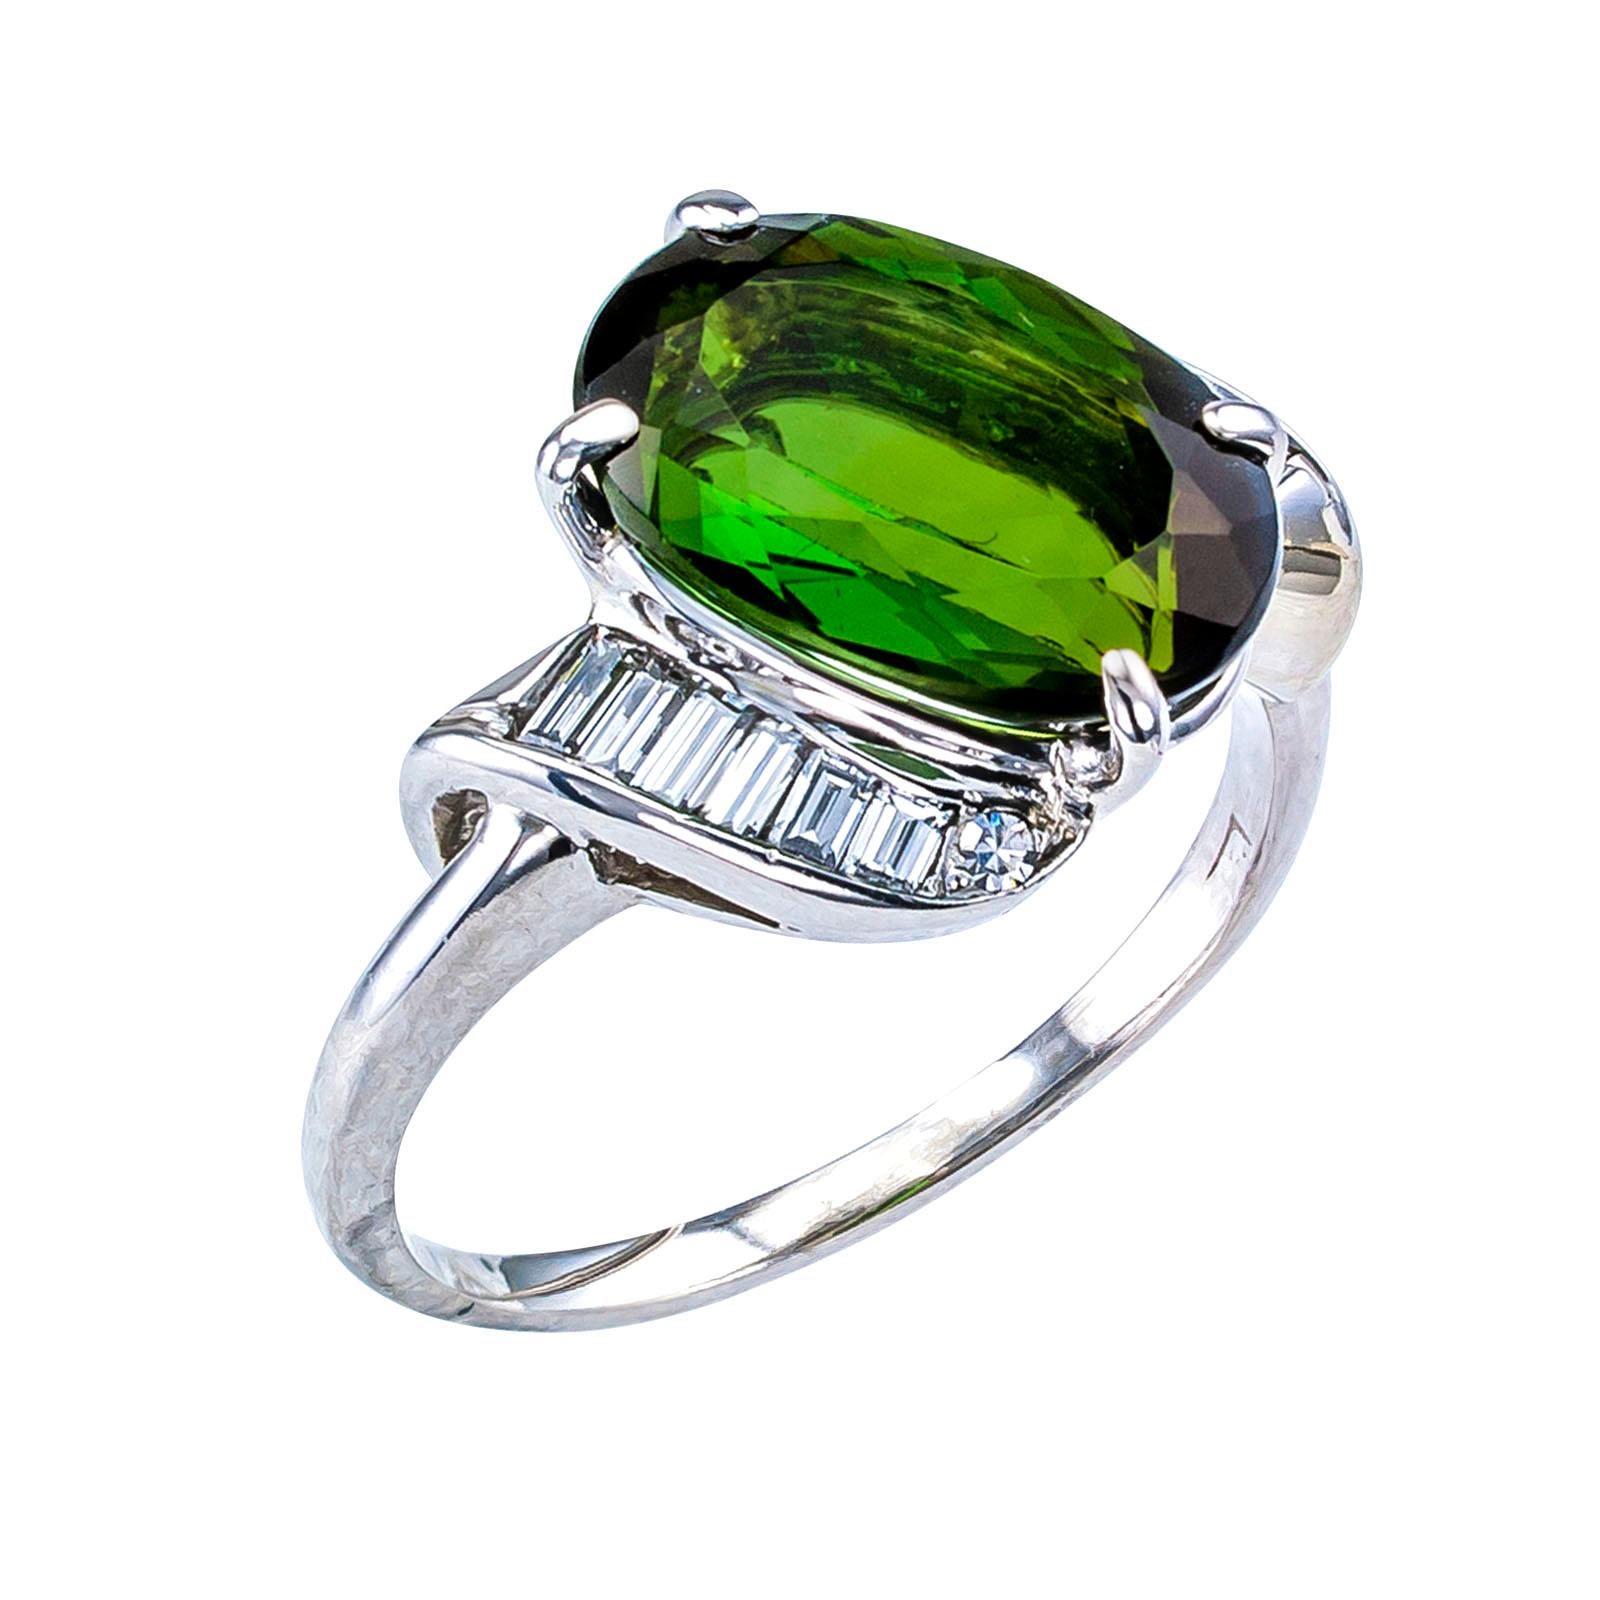 Green tourmaline and diamond white gold ring circa 1950.

SPECIFICATIONS; A7869

DIAMONDS: twelve baguette and two single-cut diamonds totaling approximately 0.30 carat, approximately H color and VS clarity.

GEMSTONES: one oval-shaped, faceted